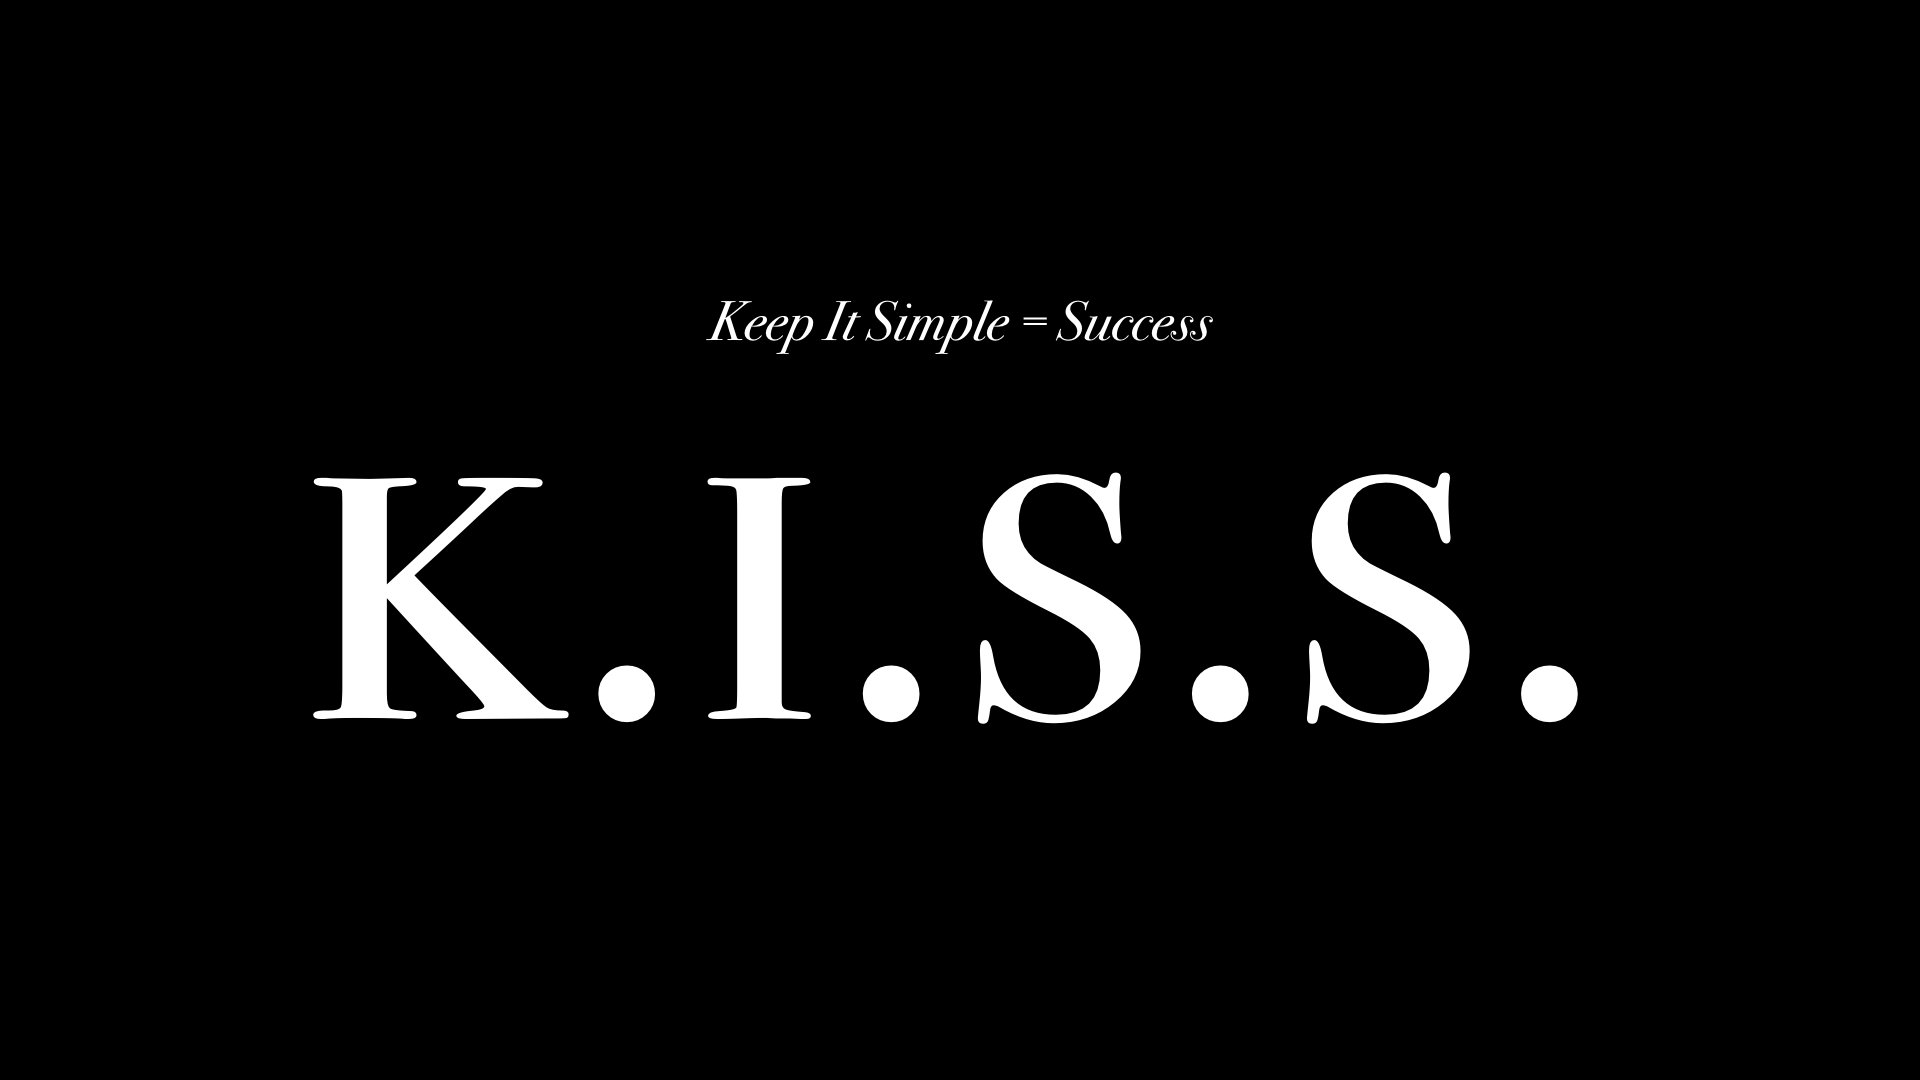 Friday Feature: My What: K.I.S.S. (Keep It Simple = Success)